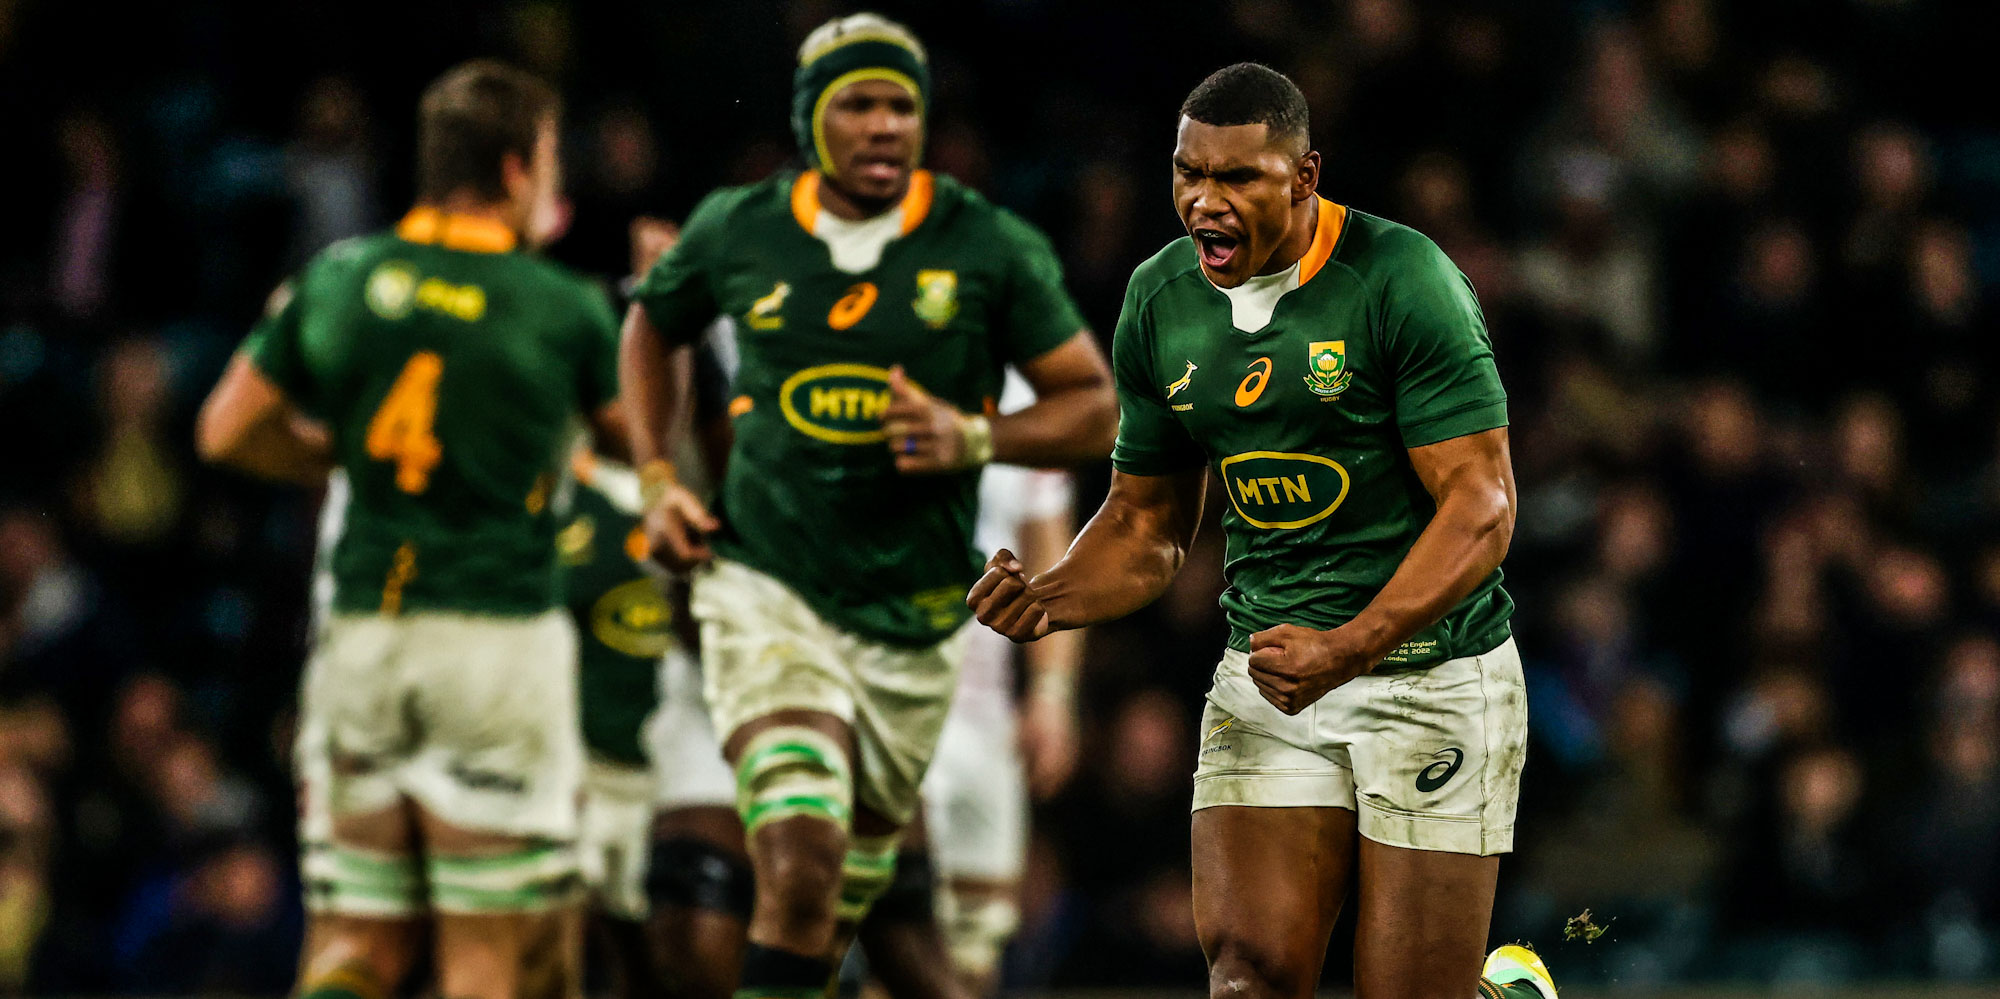 Damian Willemse landed two brilliant drop goals in the Test.